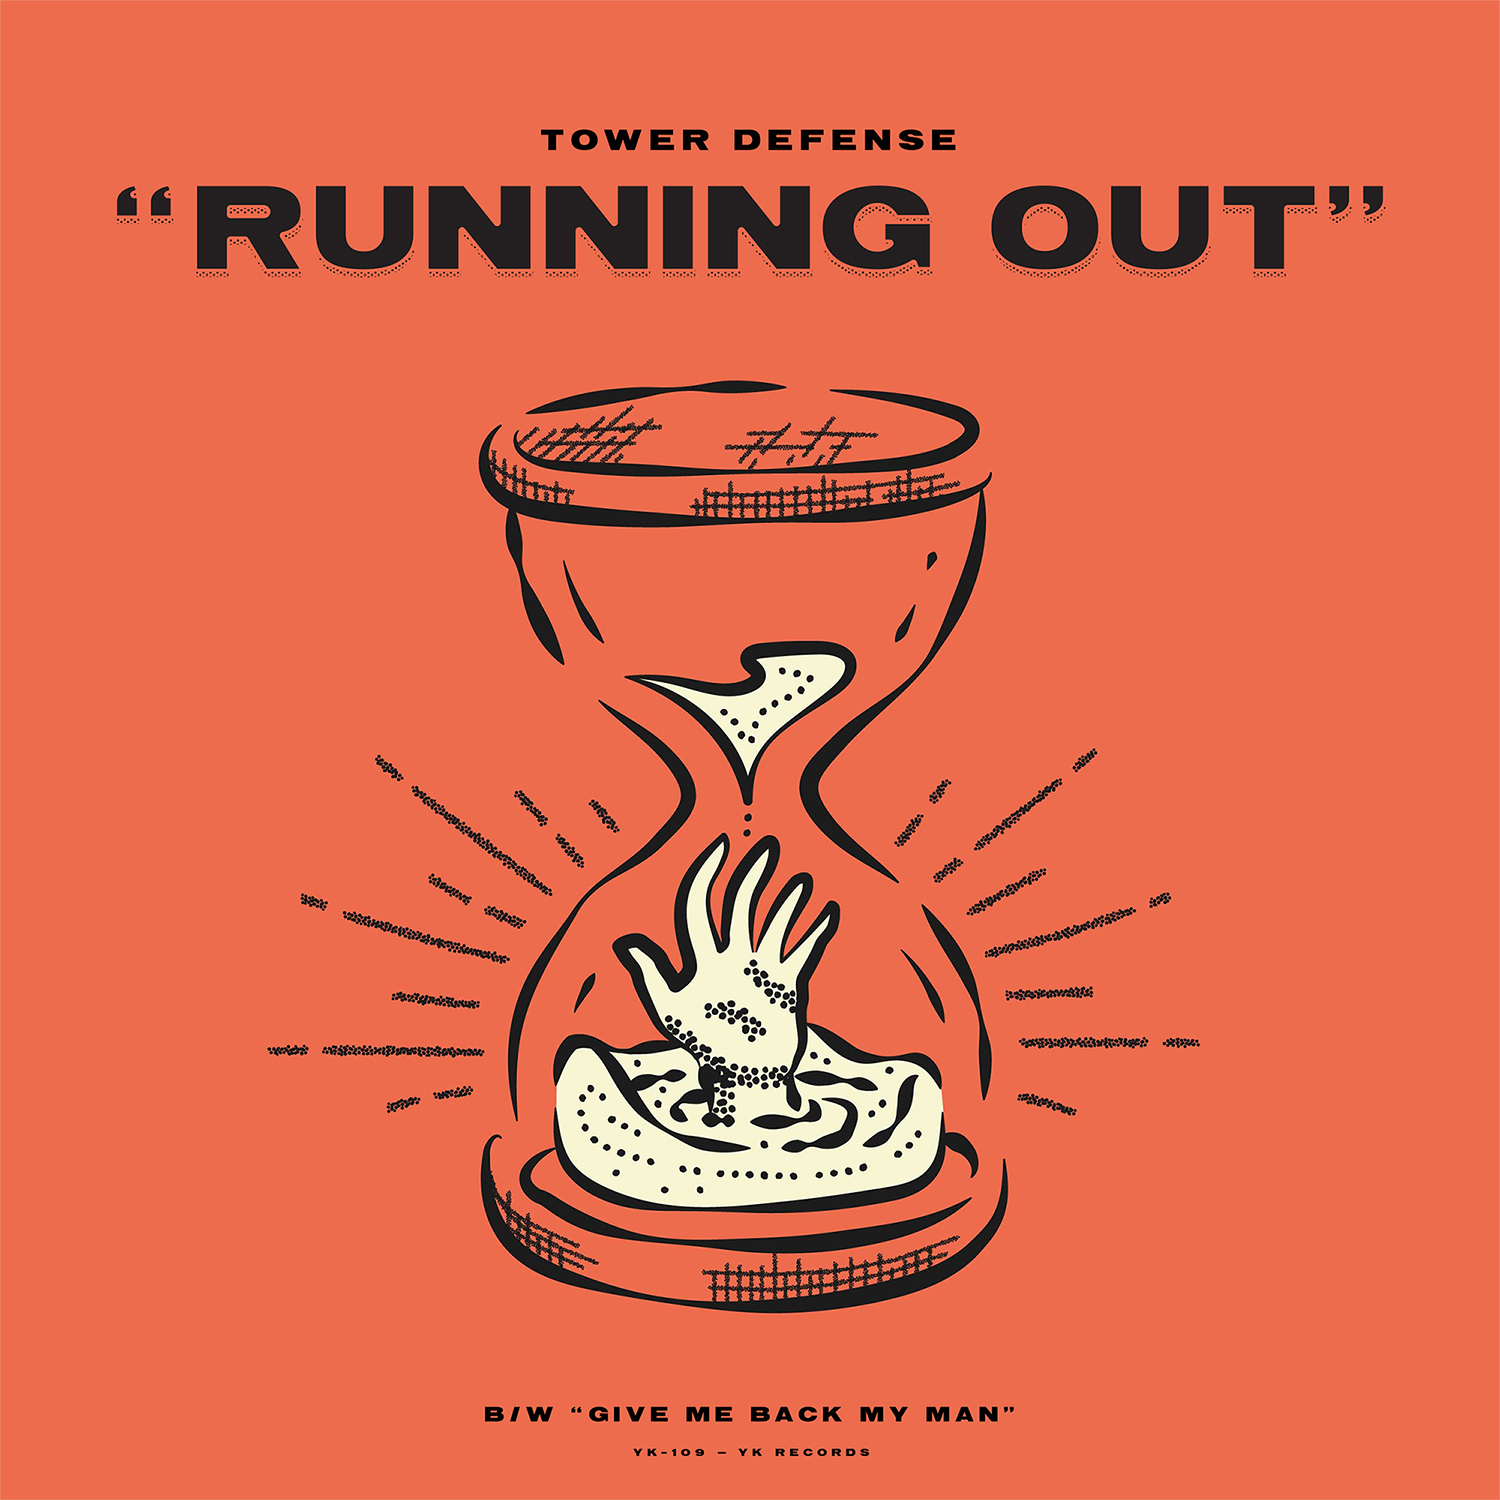 Tower Defense - “Running Out” / “Give Me Back My Man”